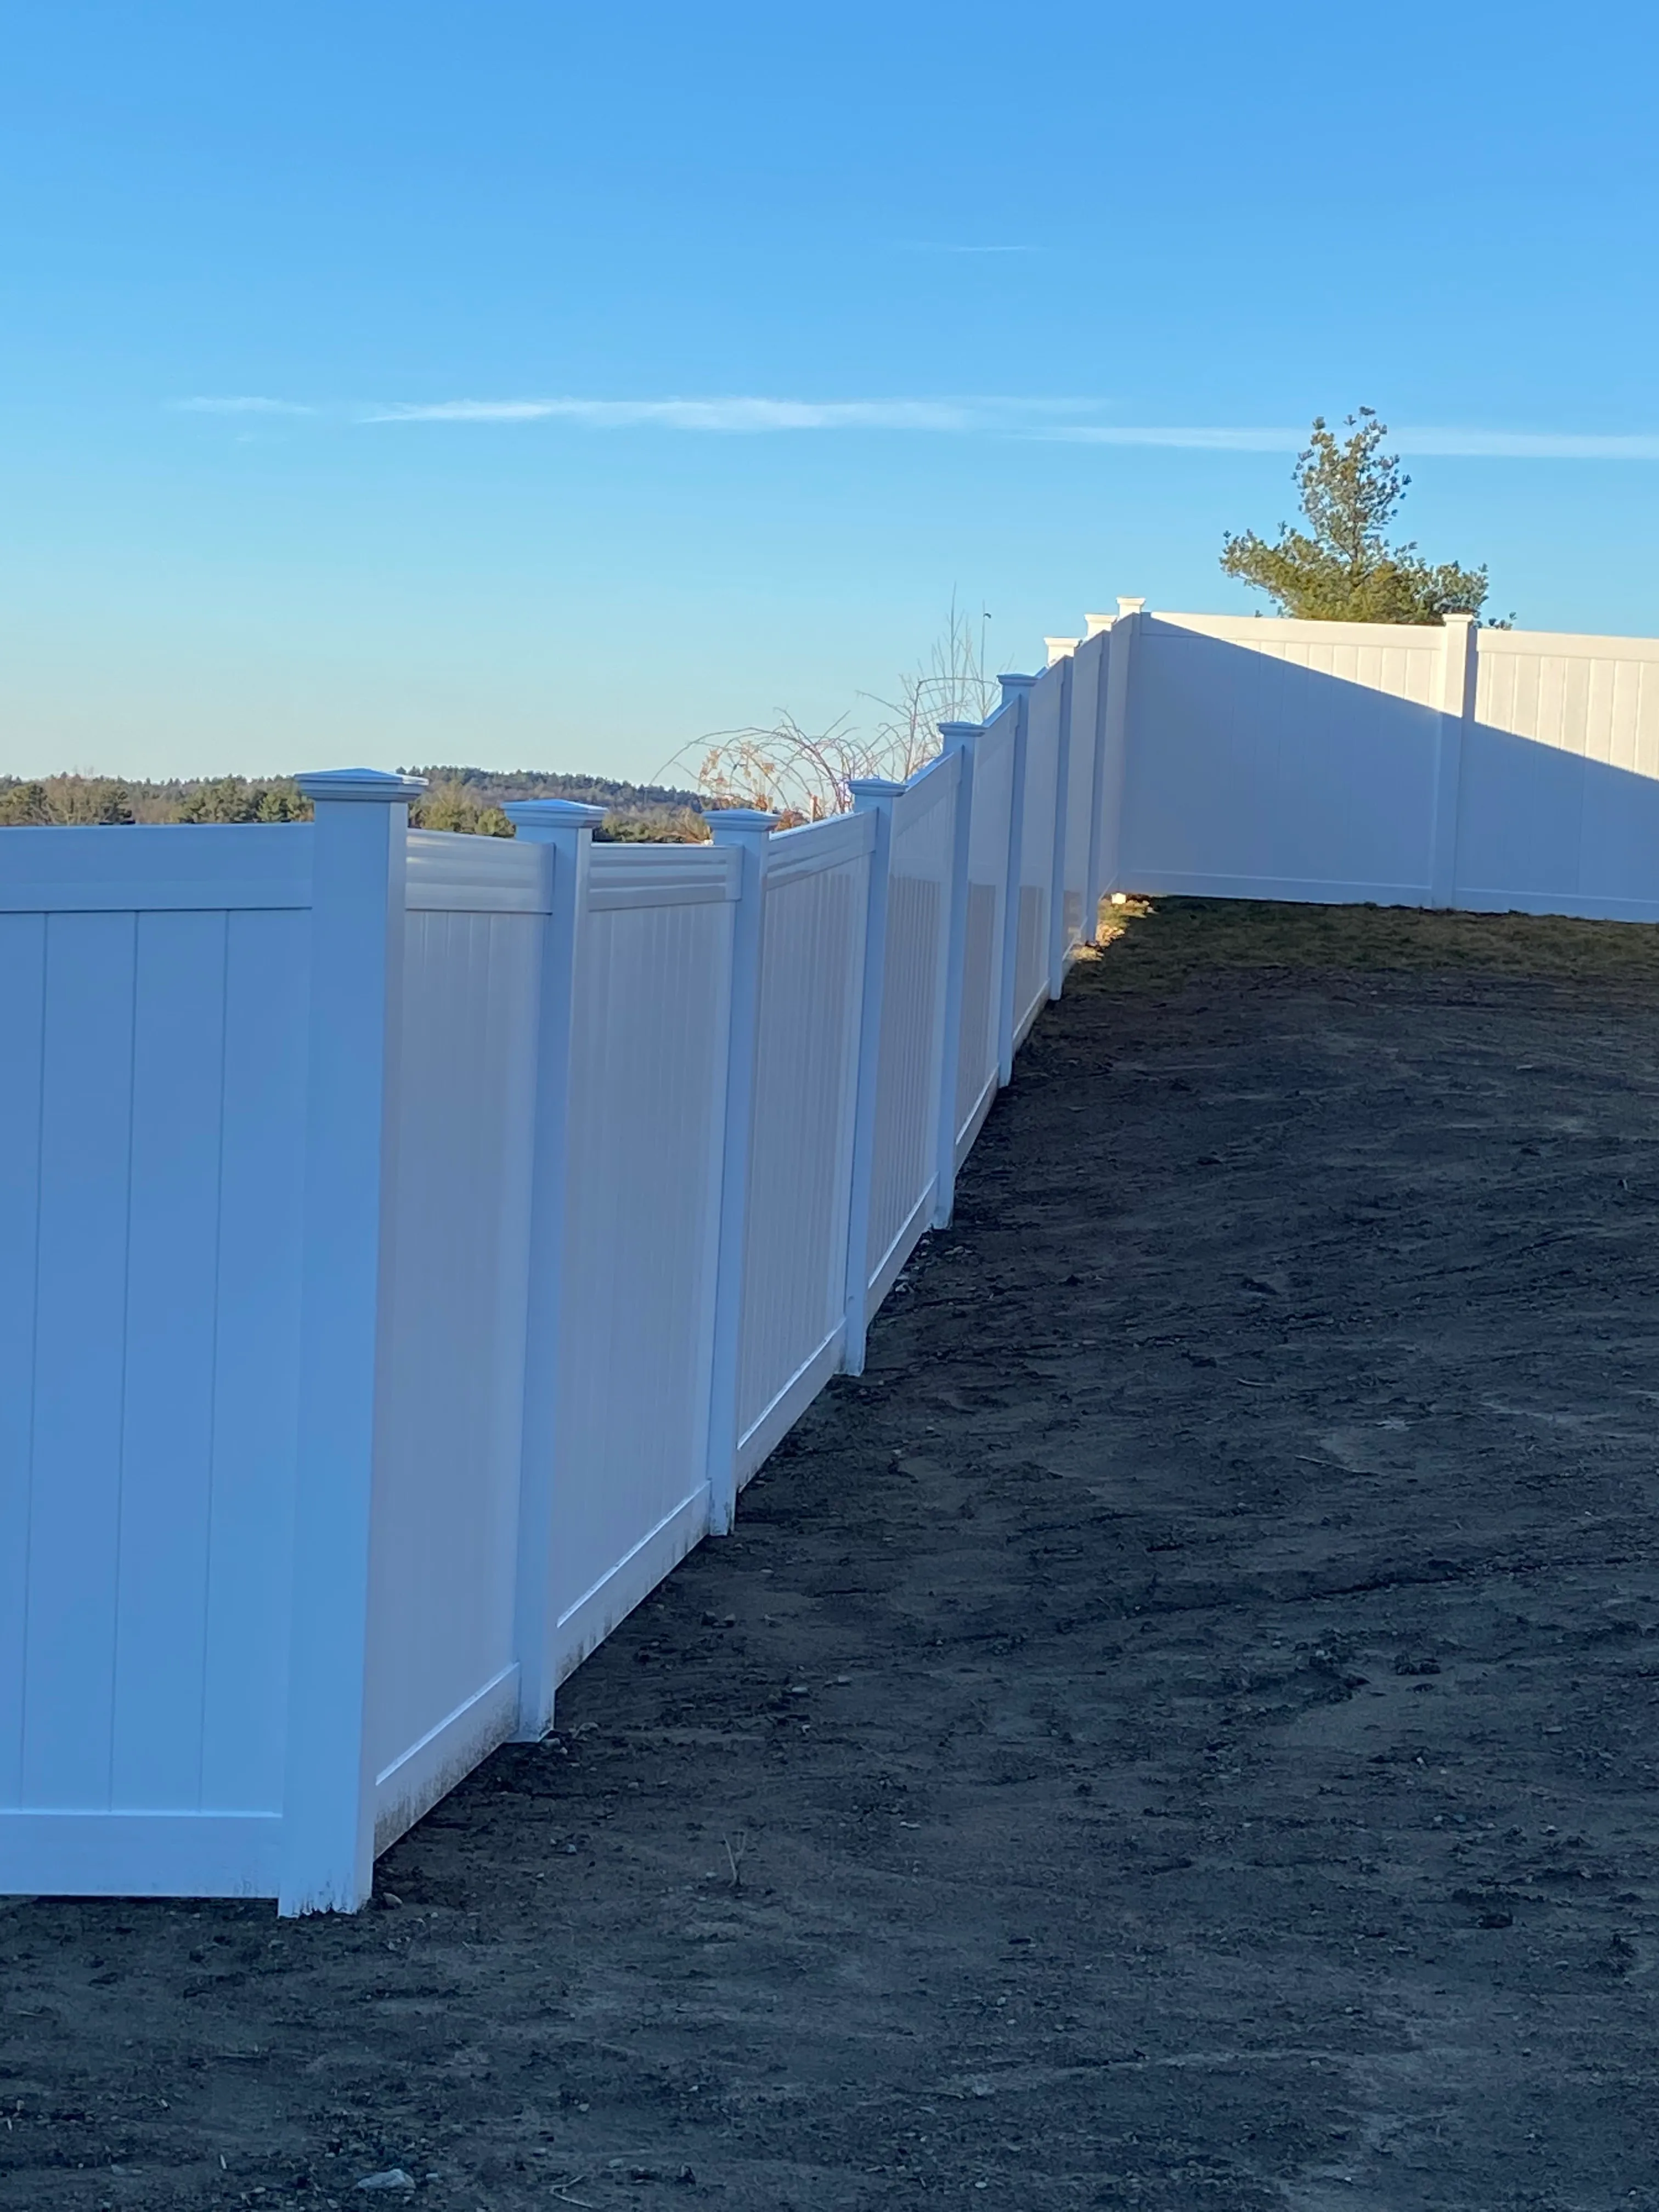 Wood for Prestige Fence LLC in Londonderry, NH